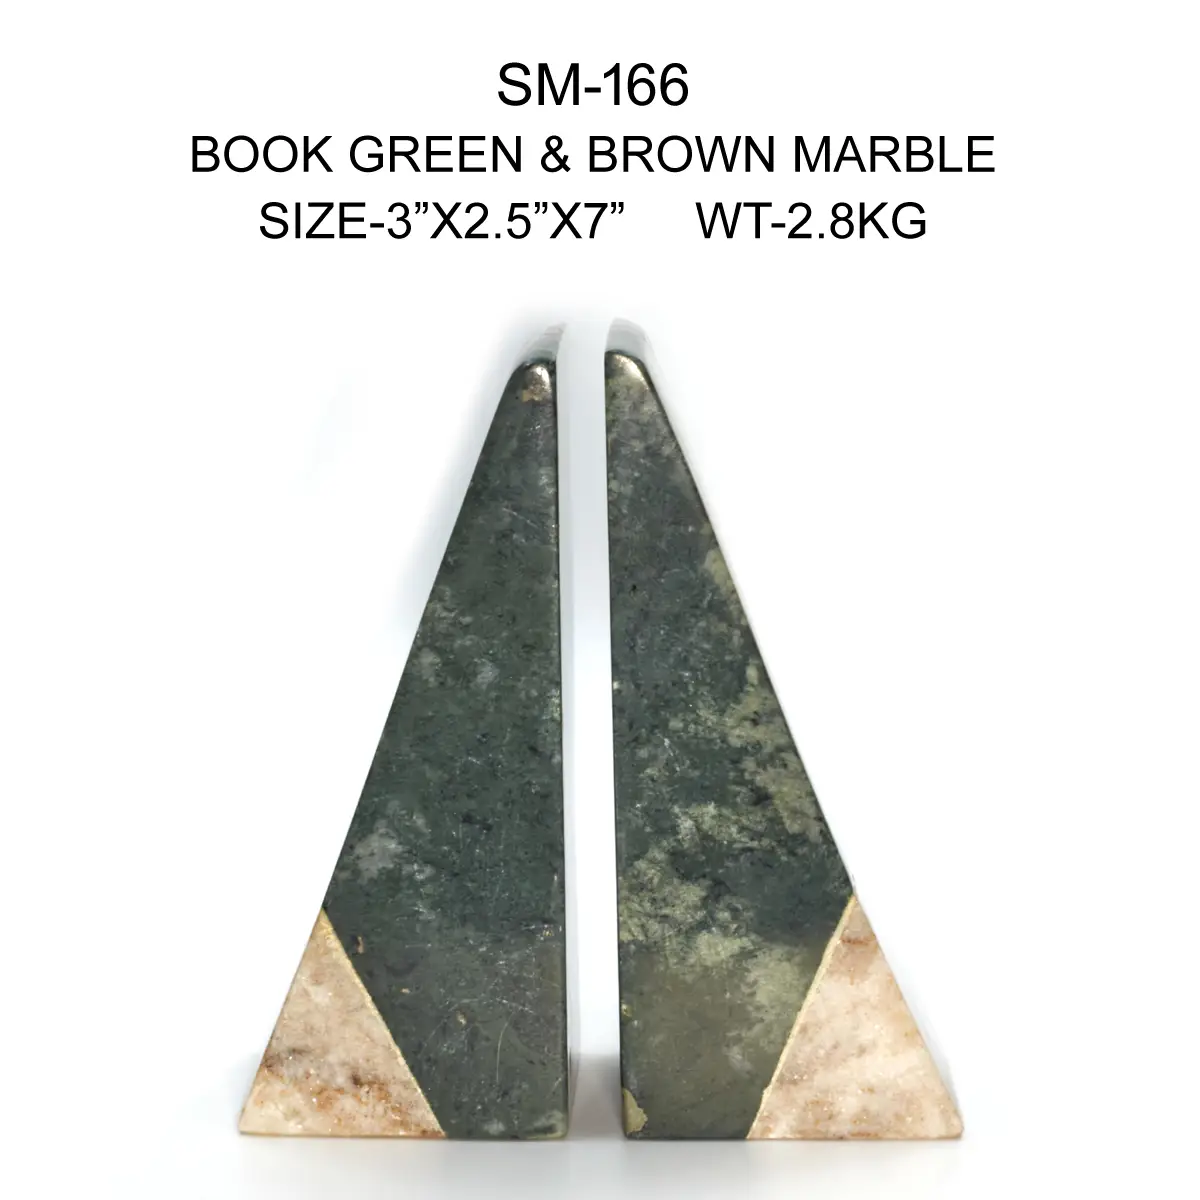 BOOK END GREEN & BROWN MARBLE